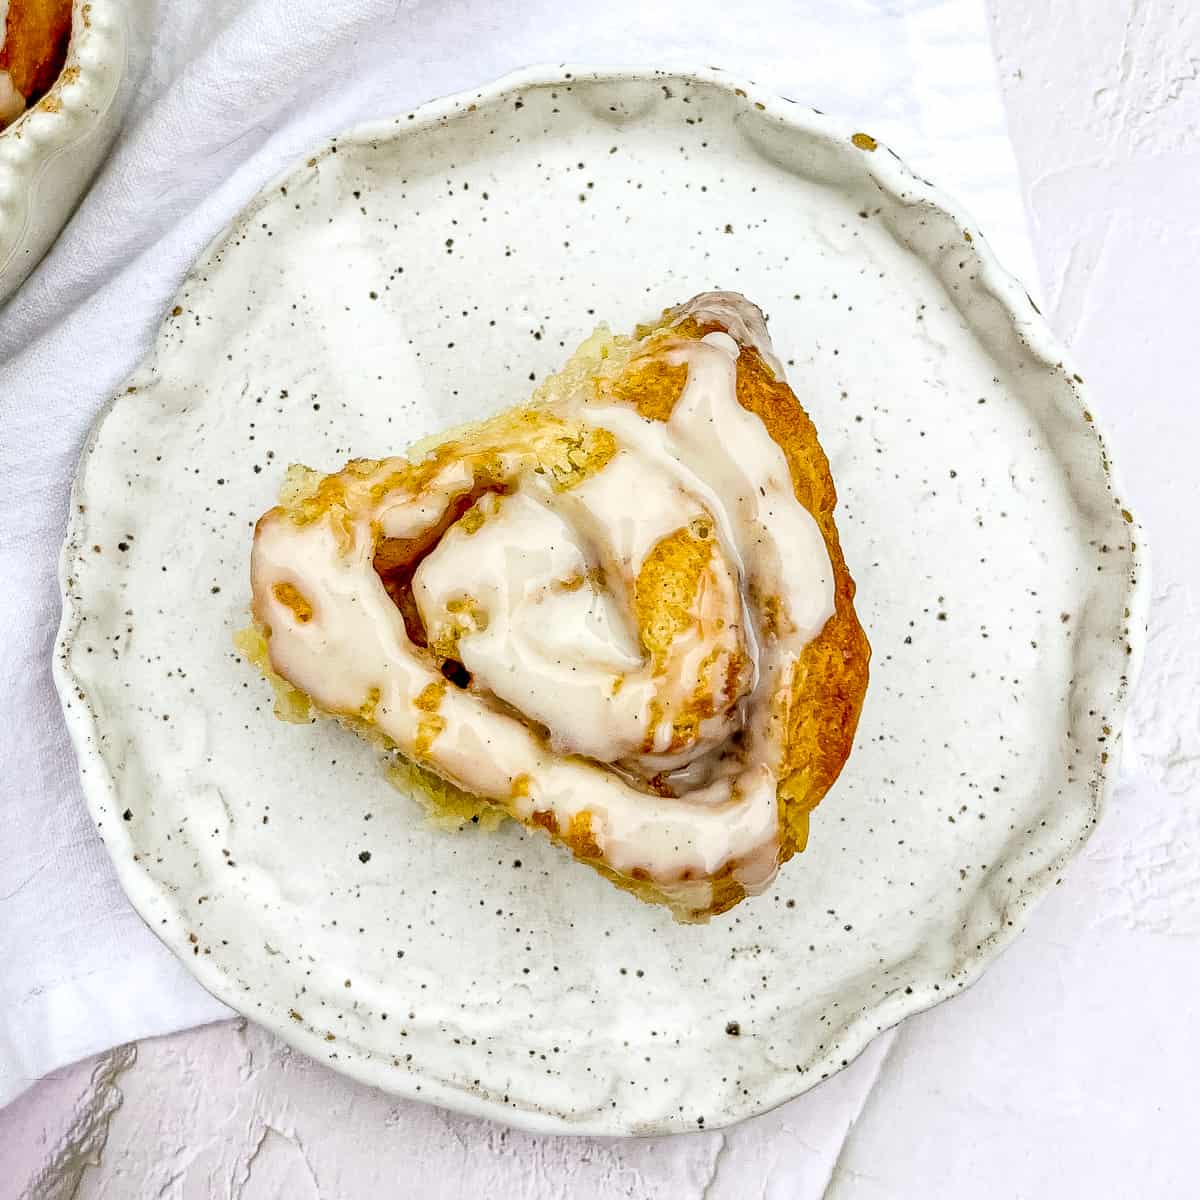 glazed biscuit cinnamon roll on a speckled white plate.